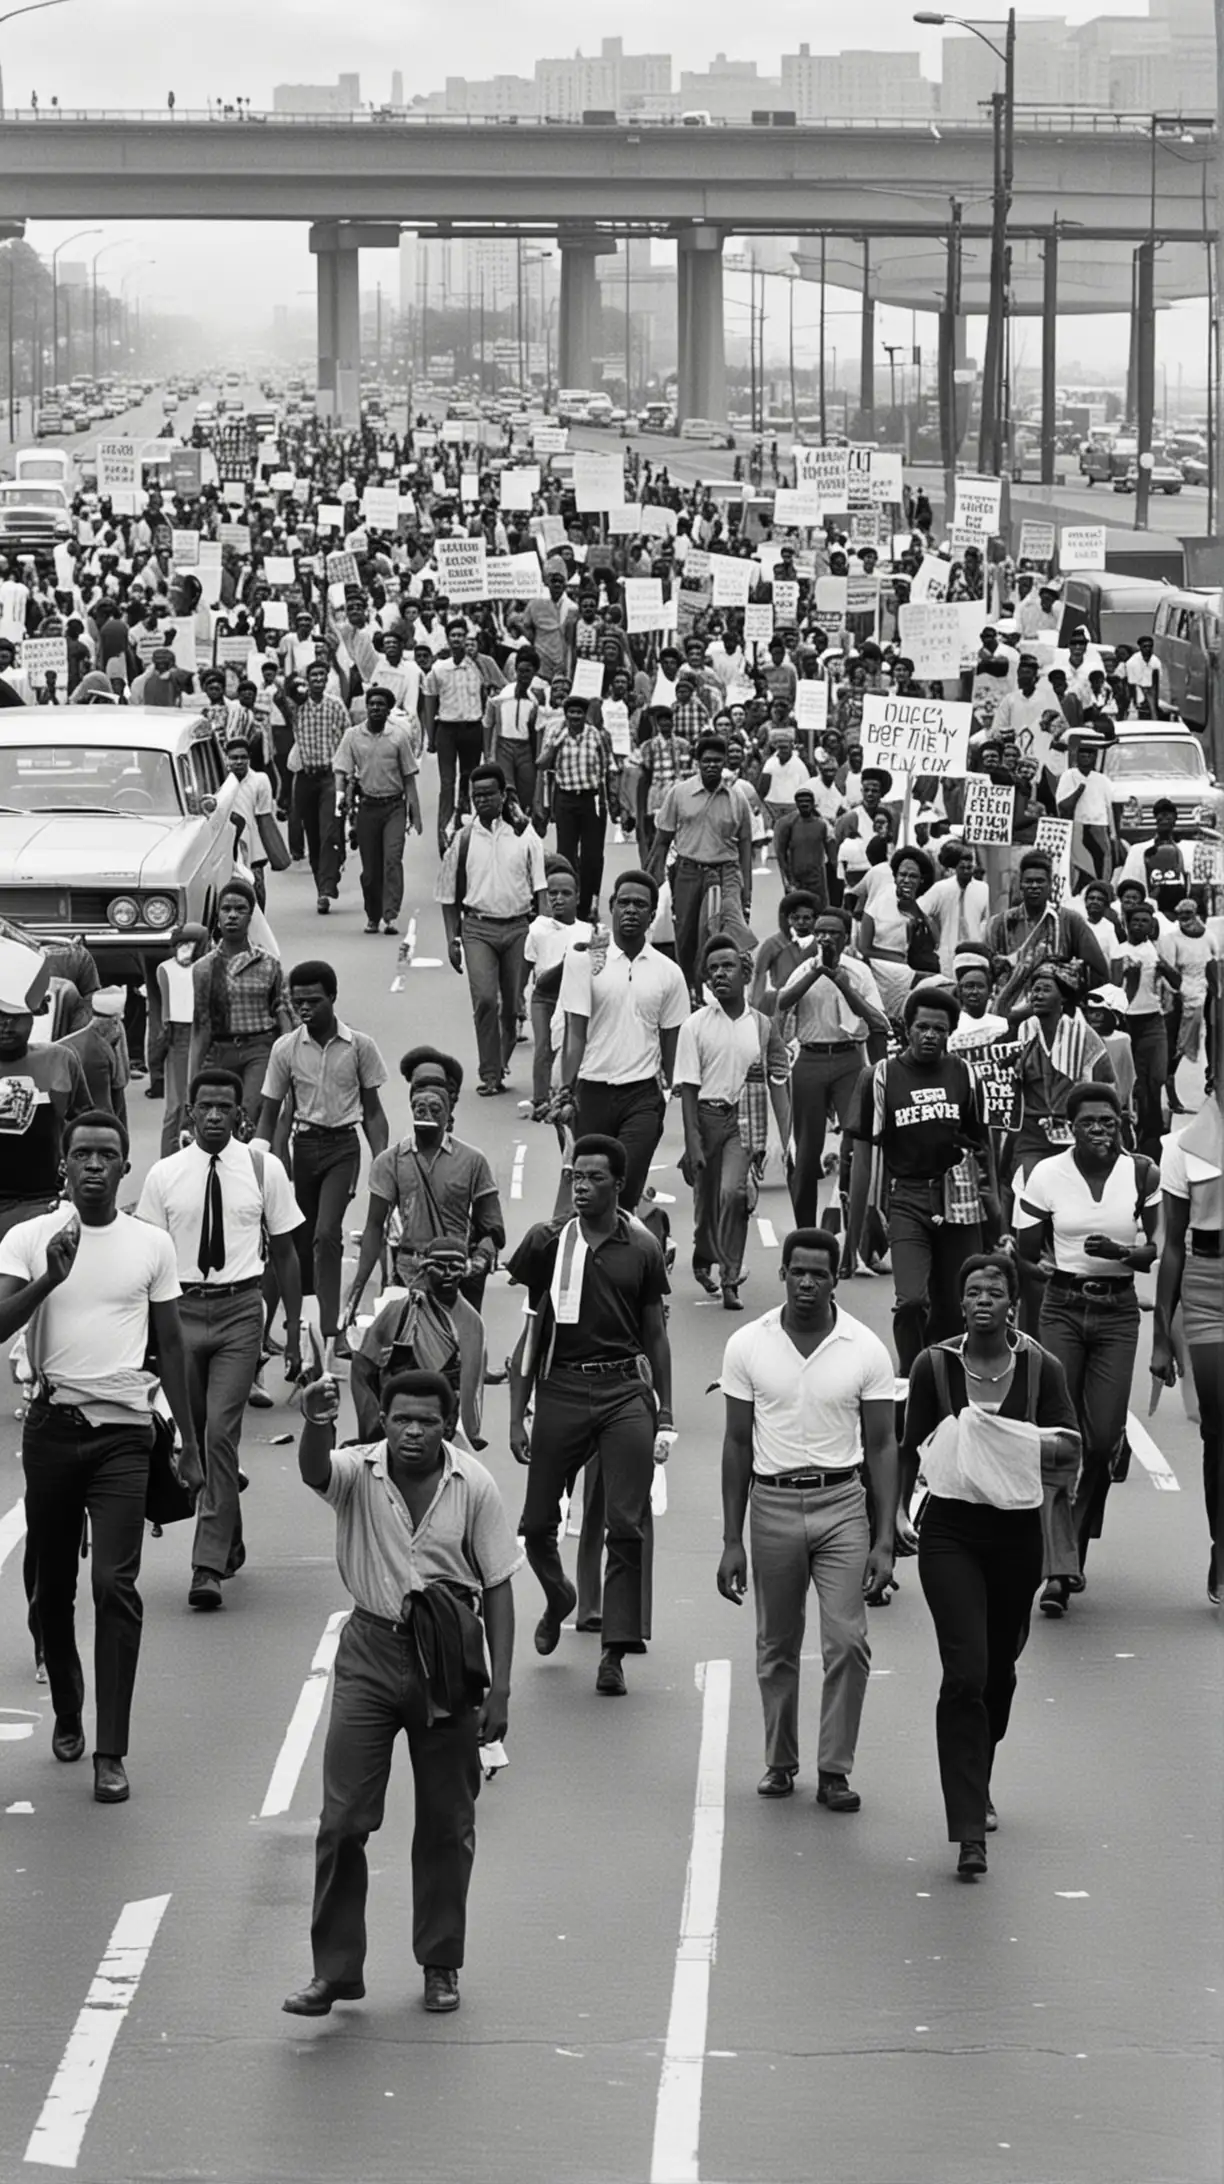 black people in the 60s protesting on the highways